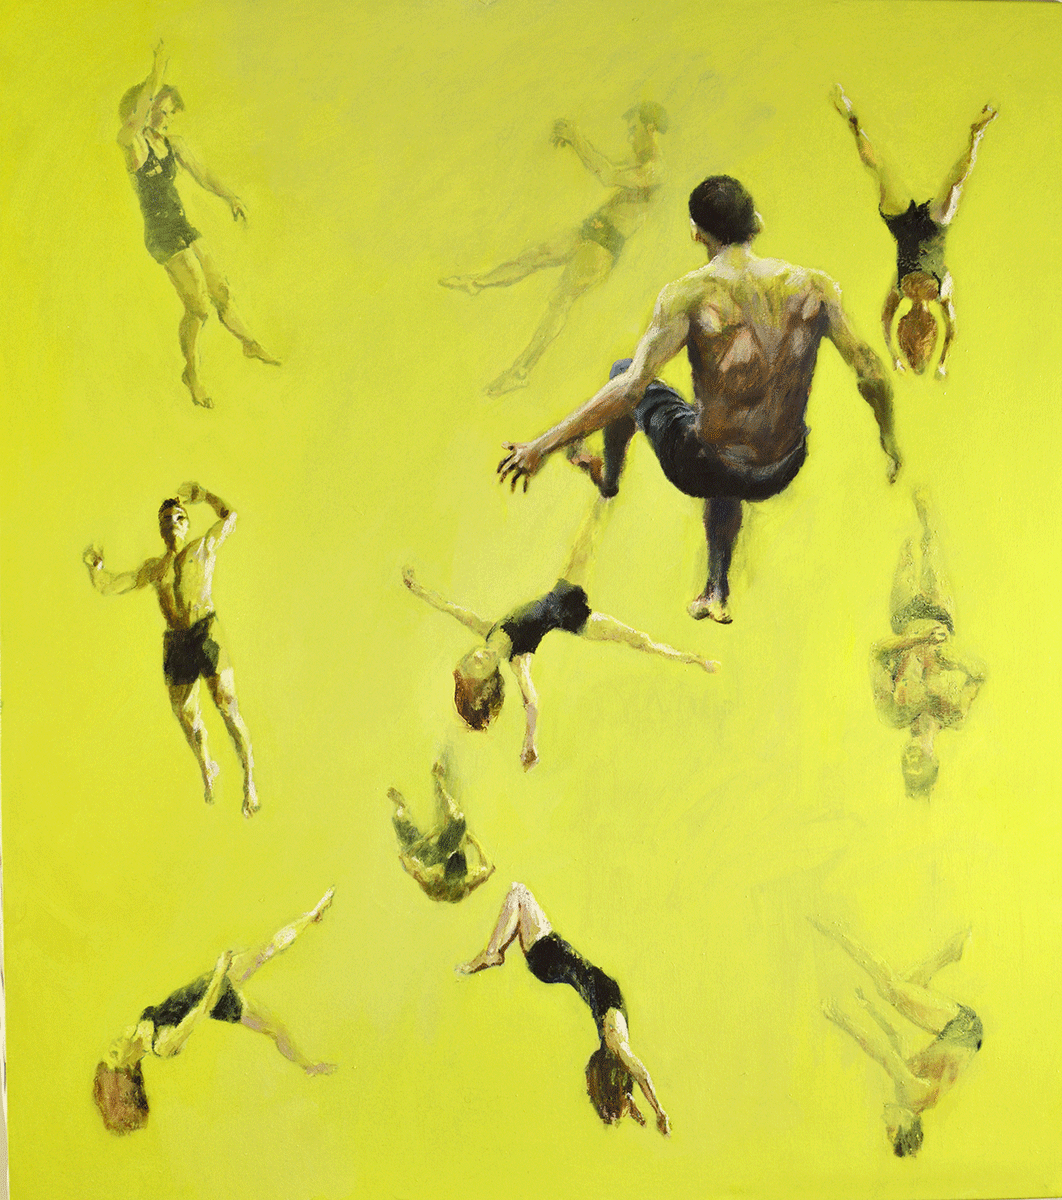 Falling, suspended and Spinning human figures- Chaotic Composition of Acrobats in an Empty Yellow Universe